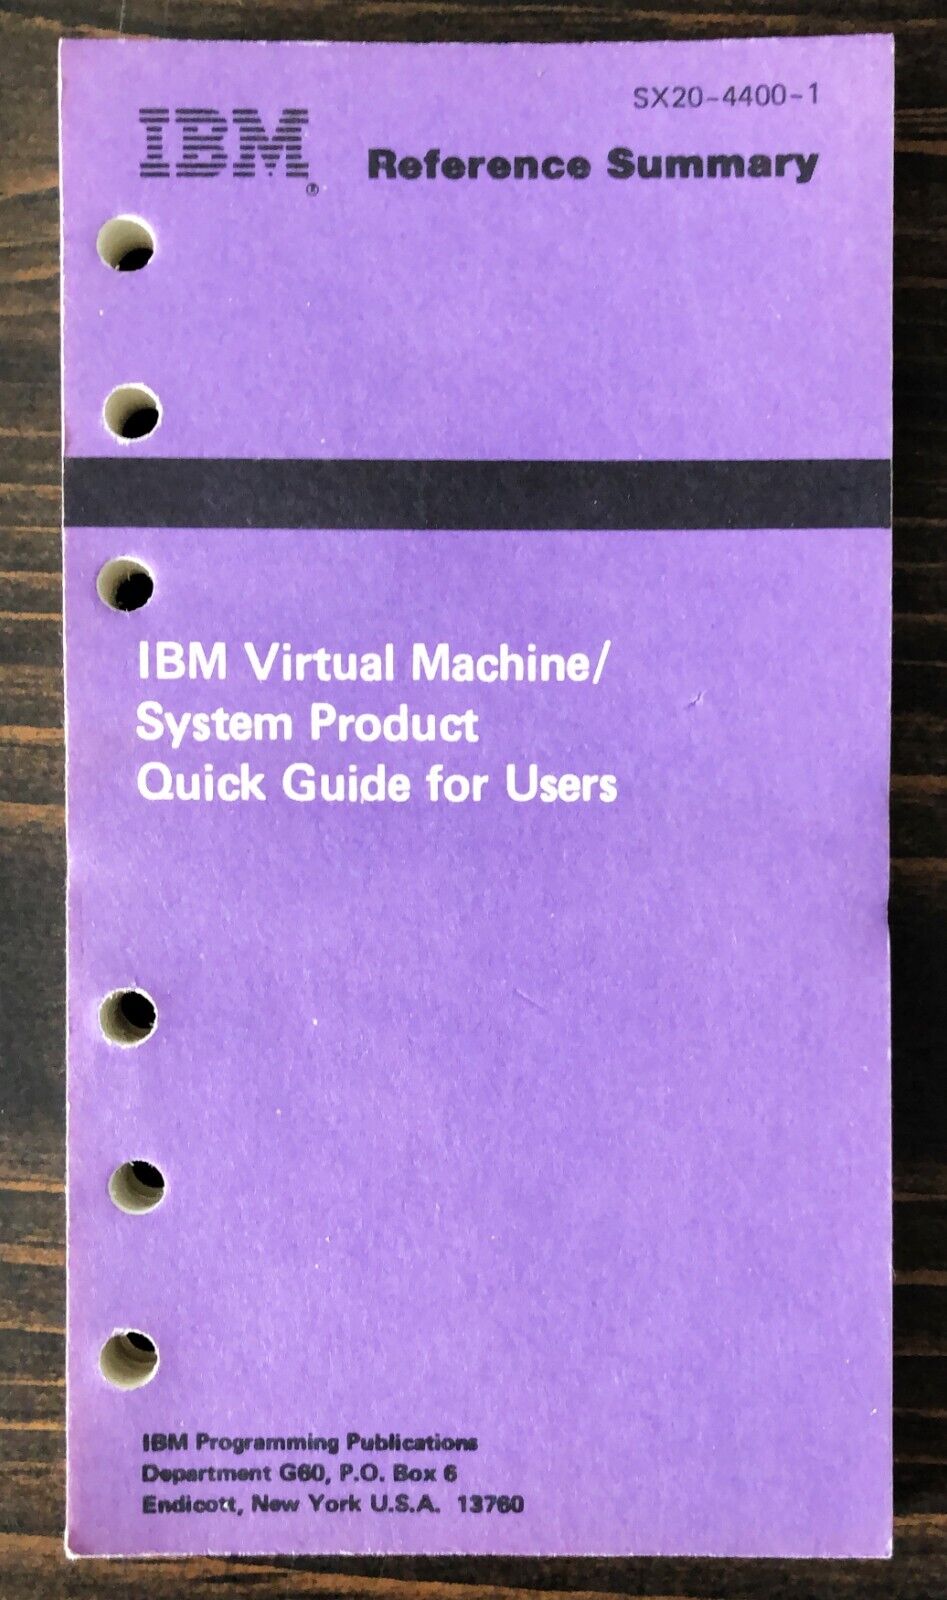 IBM - Virtual Machine System Product Quick Guide For Users Reference Summary